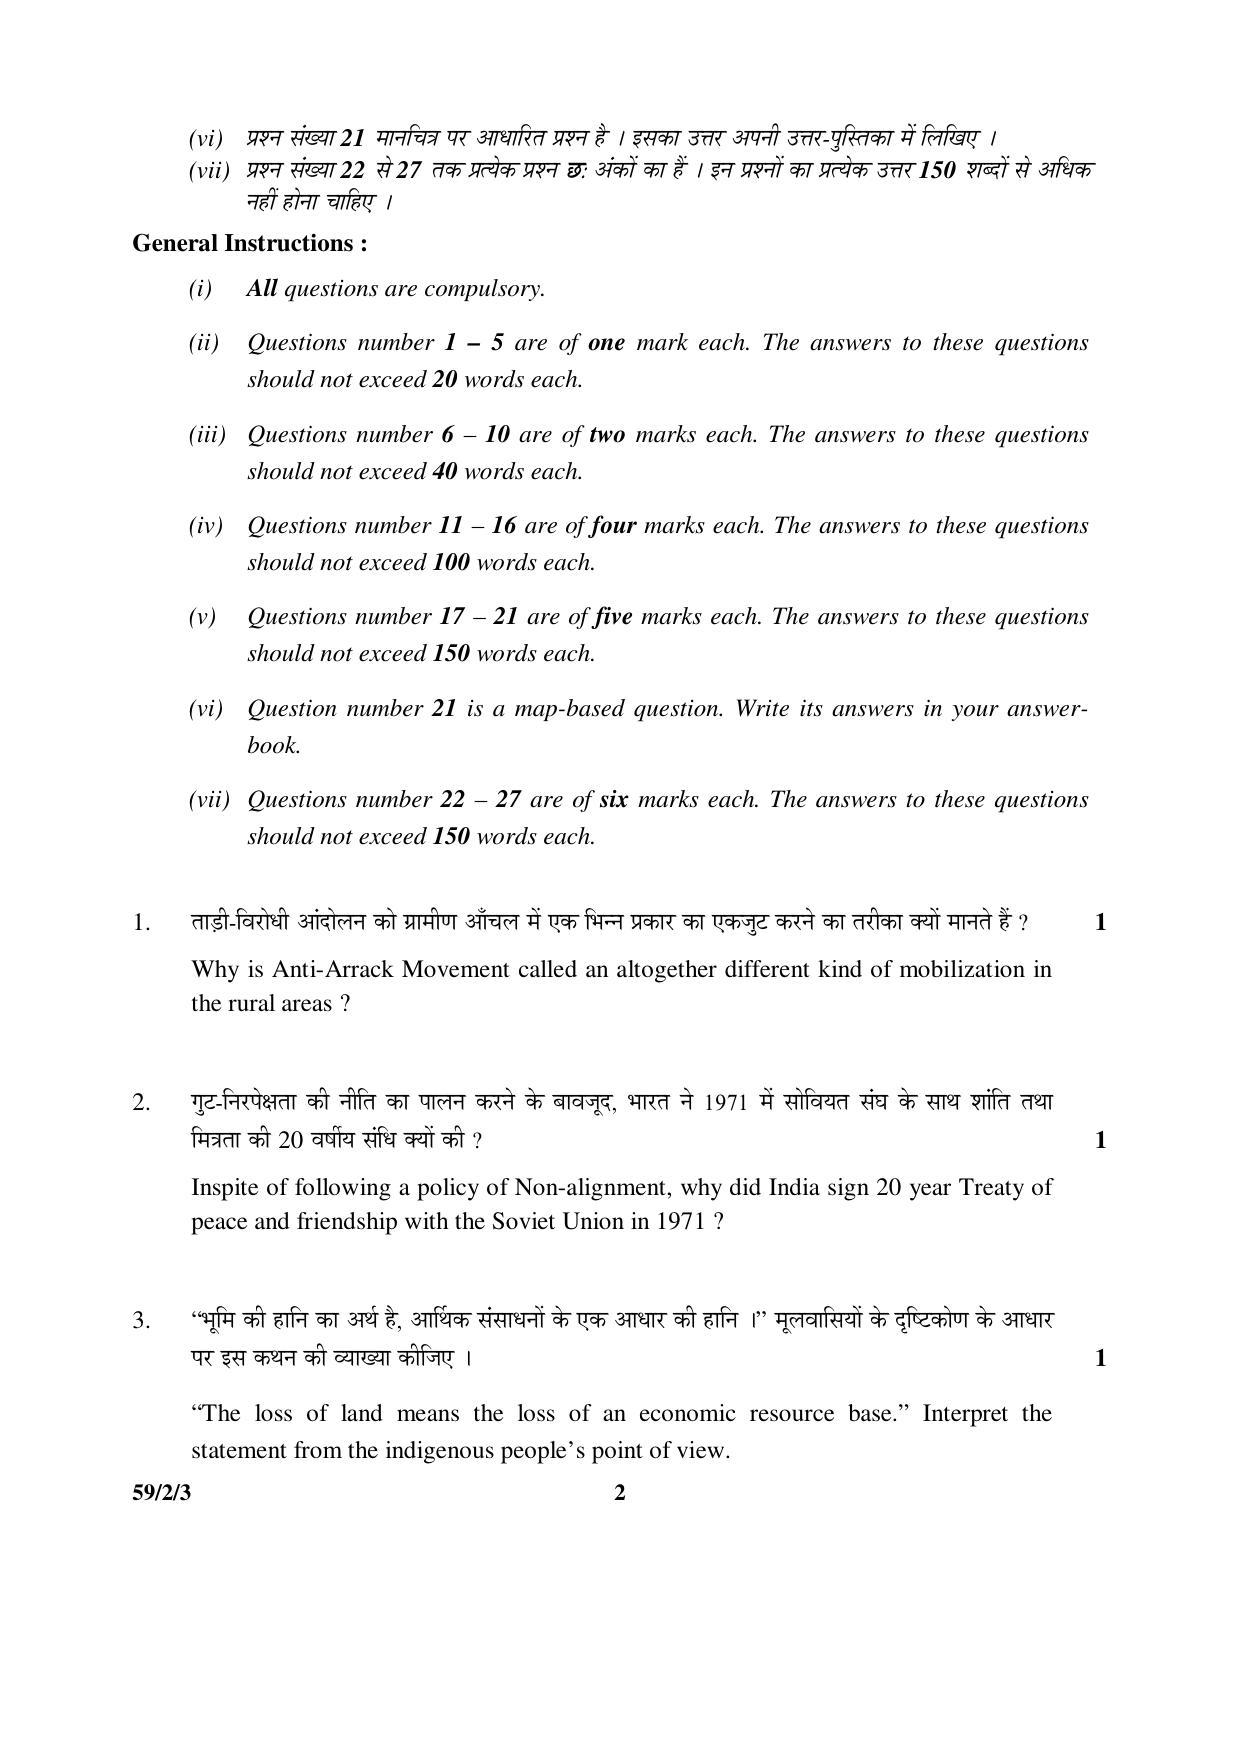 CBSE Class 12 59-2-3 _Political Science 2016 Question Paper - Page 2